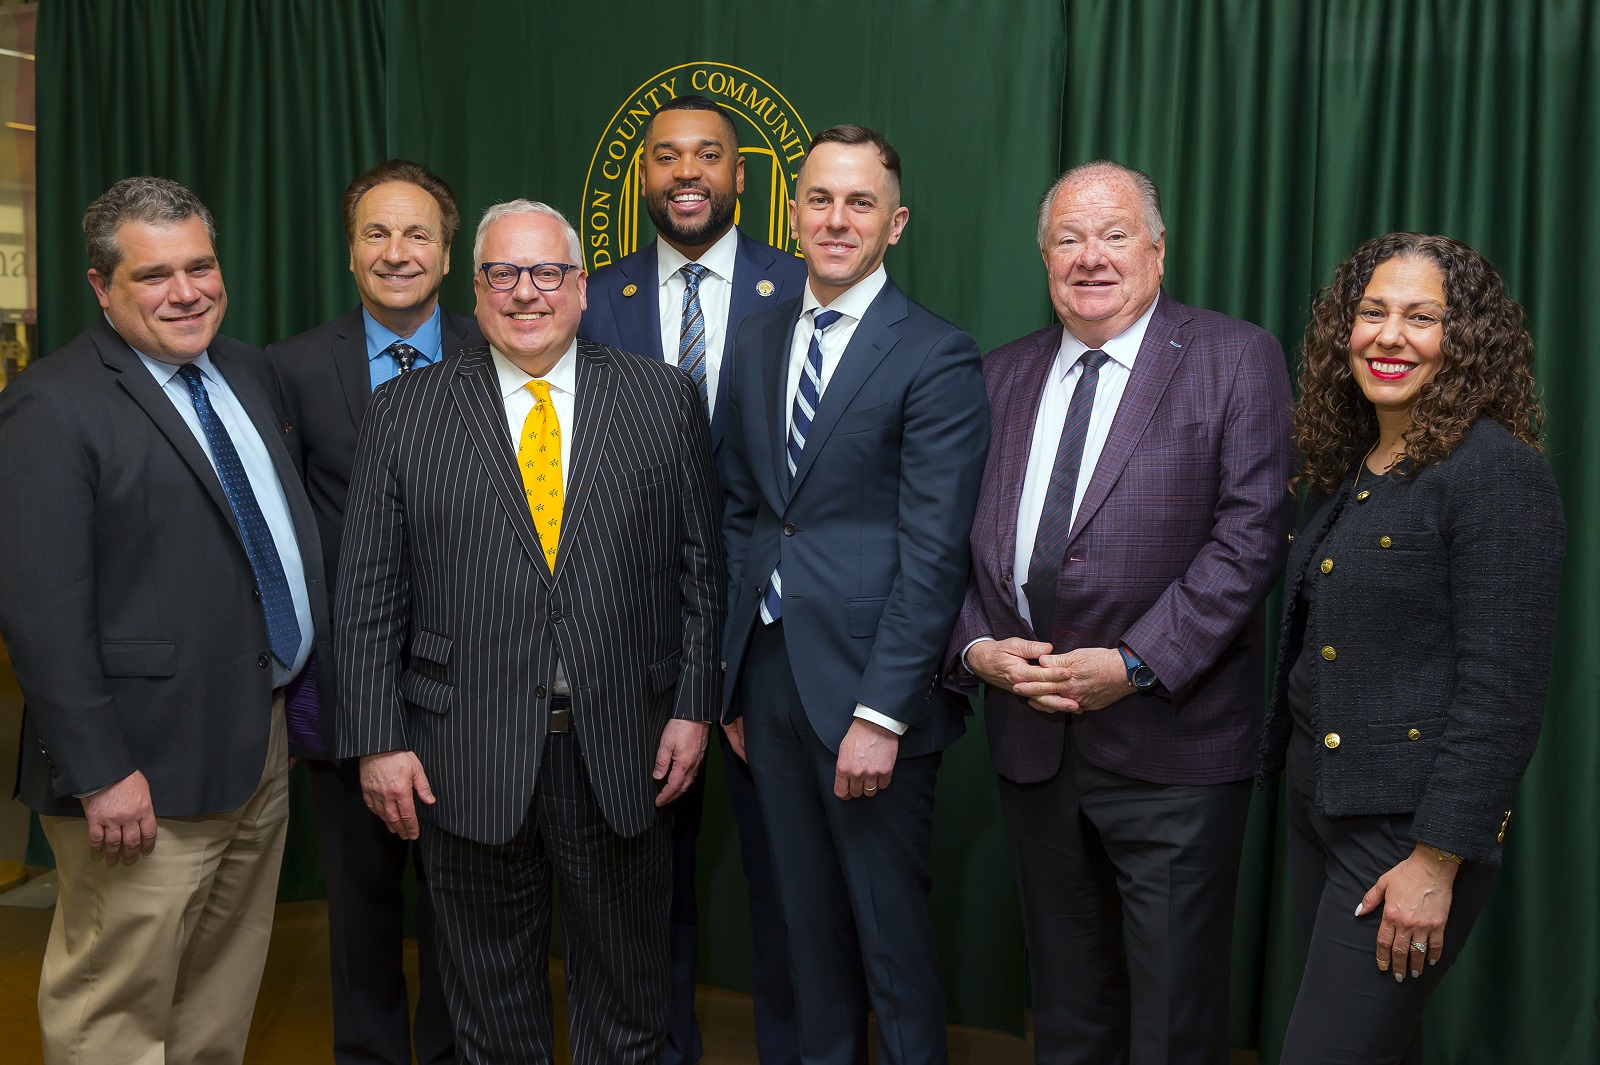 HCCC hosted Congressman Rob Menendez and County Executive Craig Guy at a press conference to discuss how the funding will strengthen the local workforce and help students obtain family-sustaining jobs.